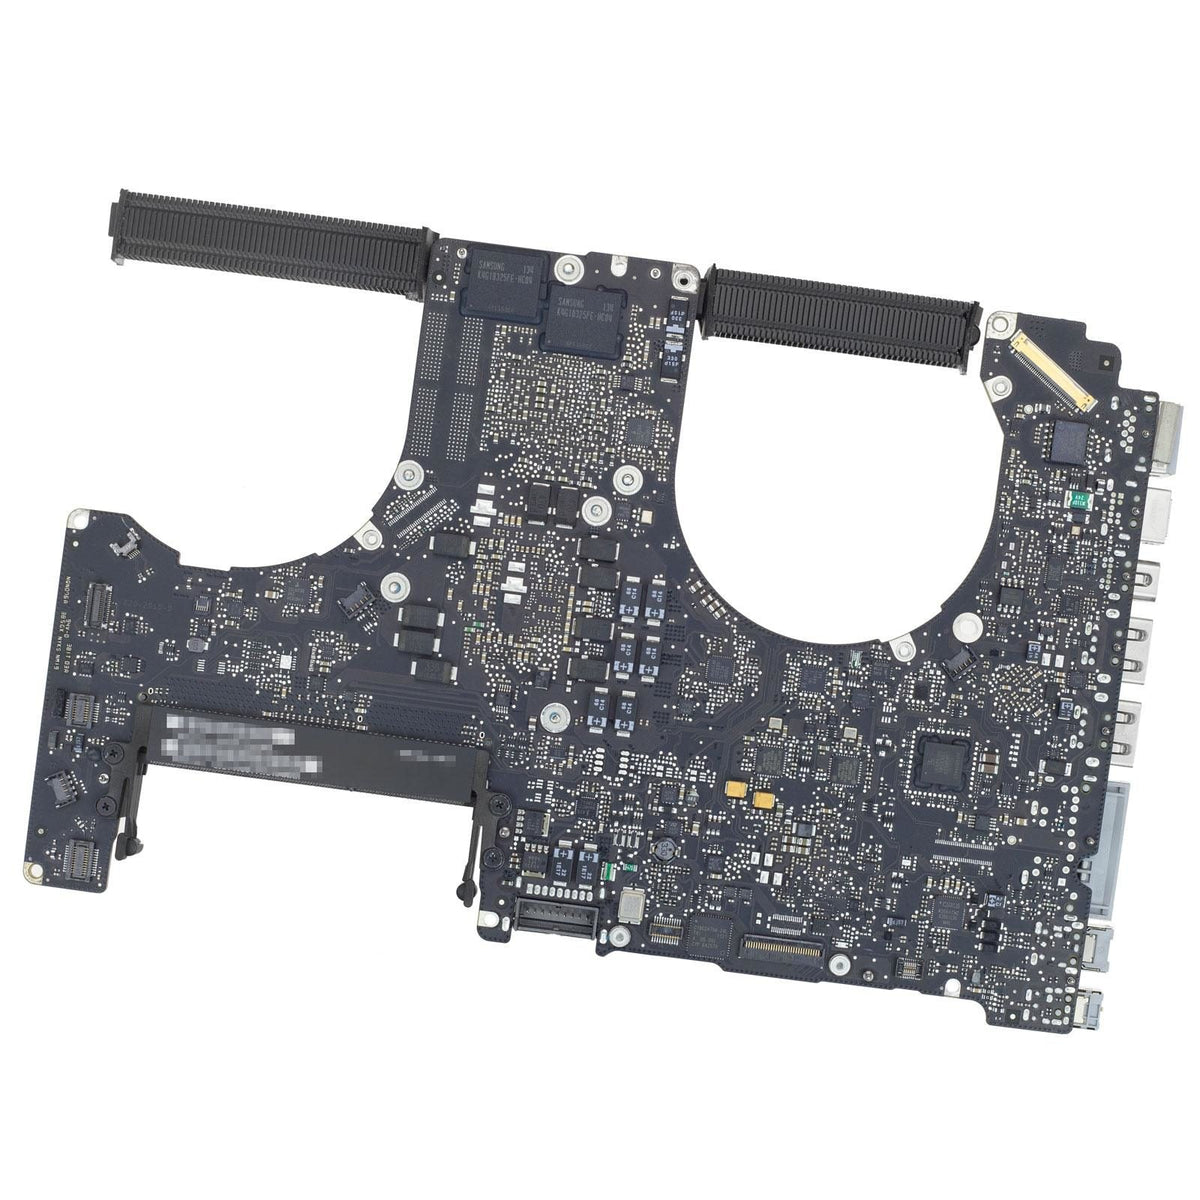 MOTHERBOARD FOR MACBOOK PRO 15" A1286 (EARLY 2011 - LATE 2011)